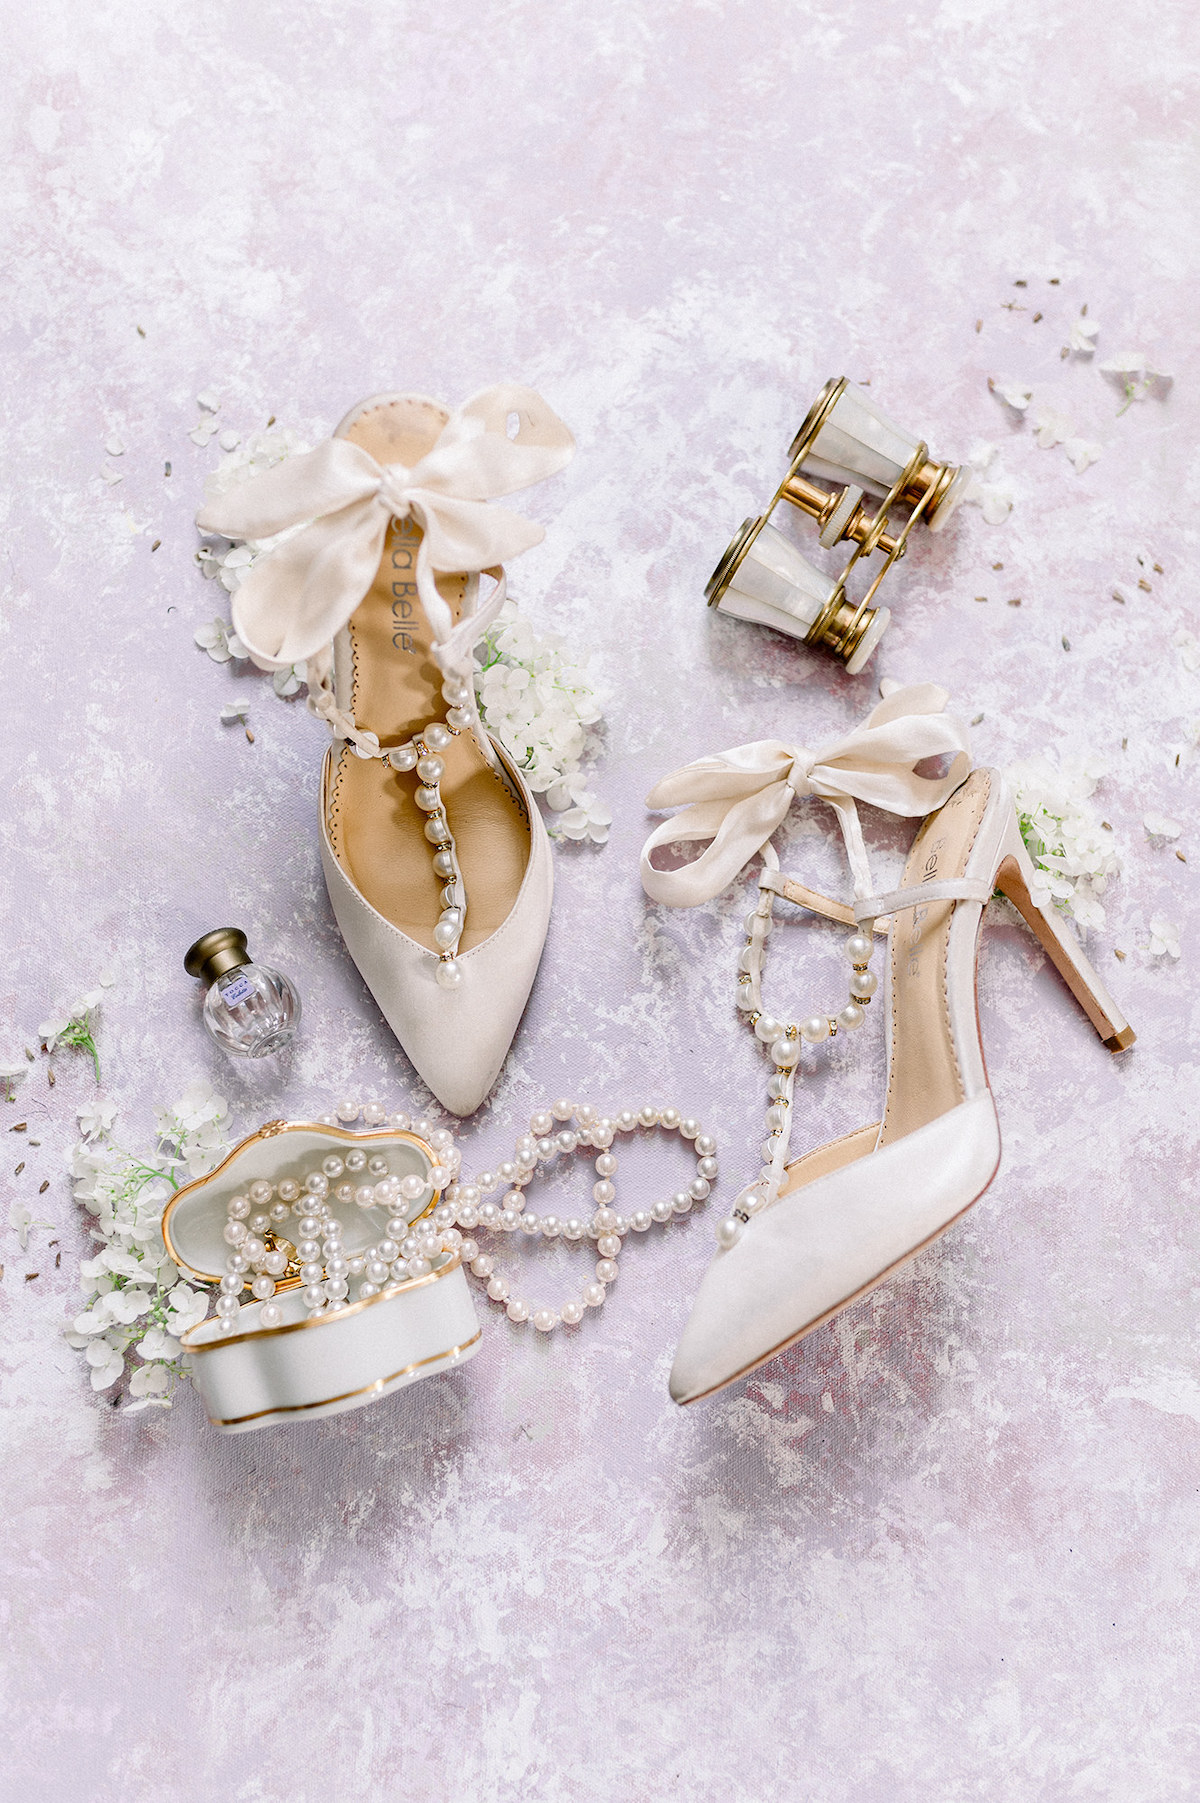 A captivating arrangement of Bella Belle shoes, delicately styled on a hand-painted backdrop, adding a touch of vintage charm to the editorial.